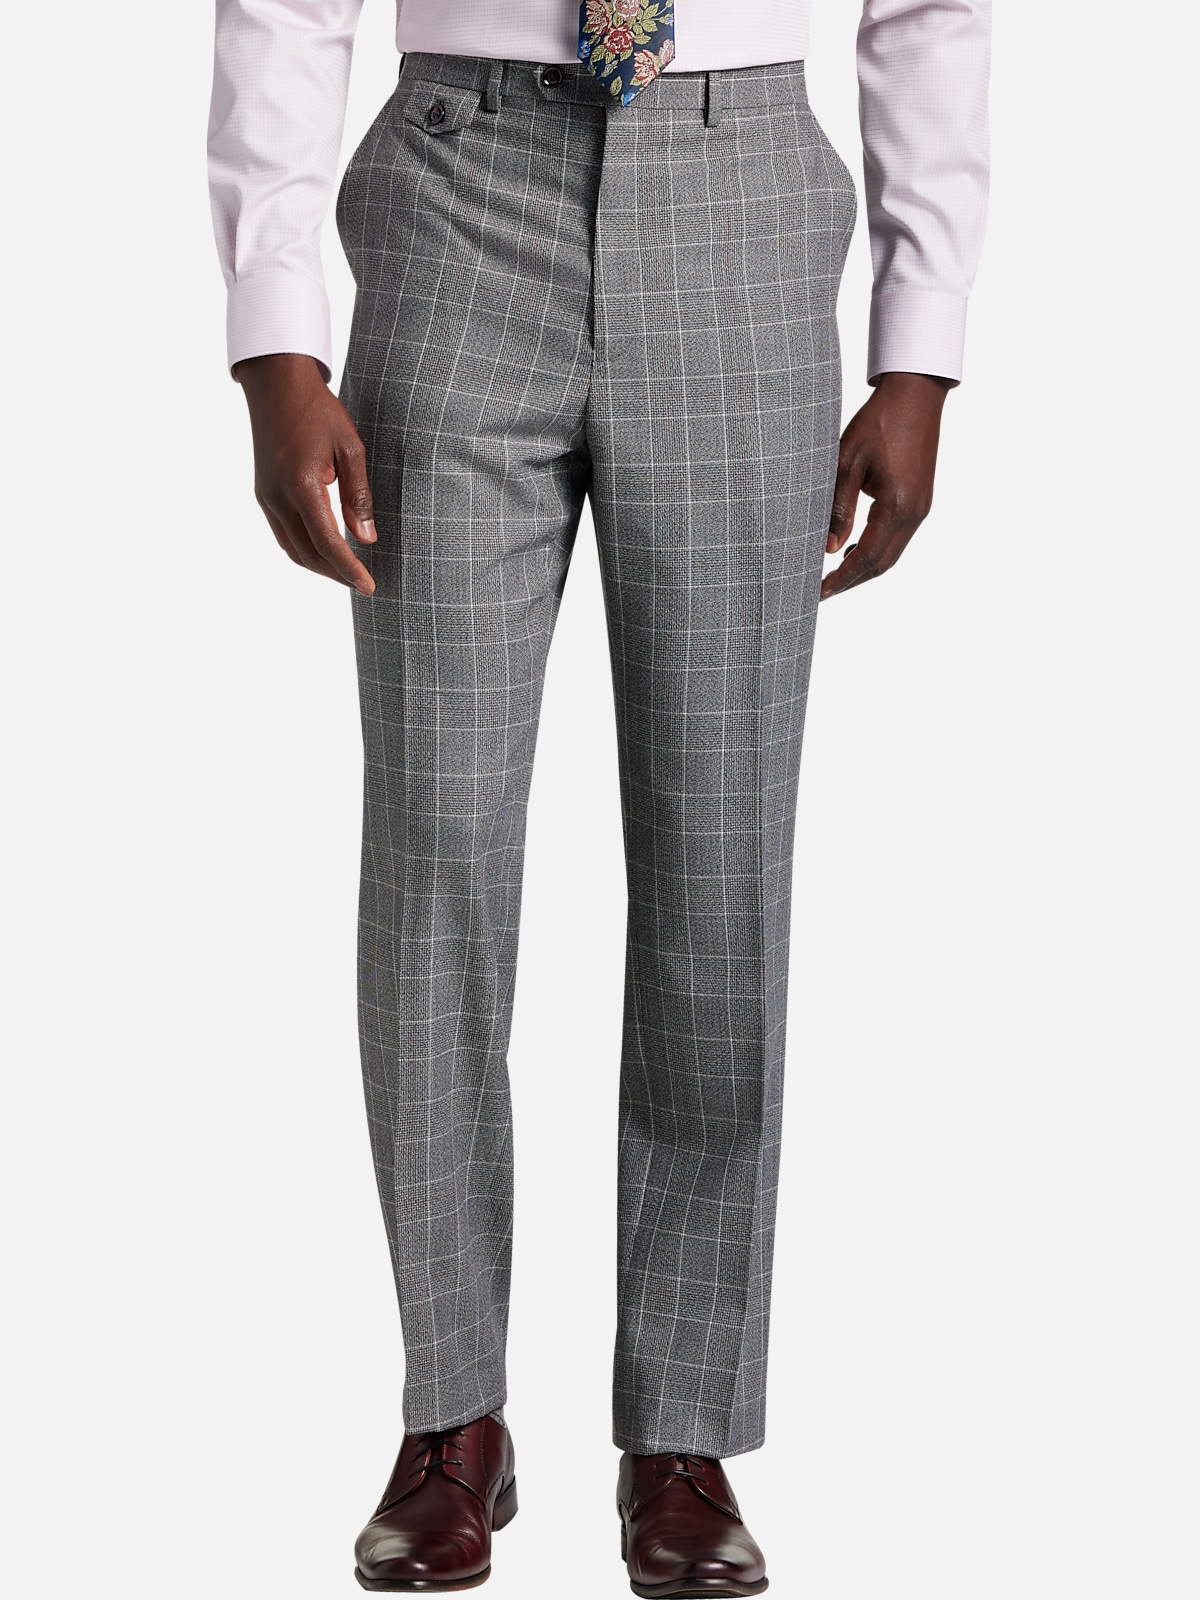 Tayion Classic Fit Suit Separate Pants | All Clearance $39.99| Men's ...